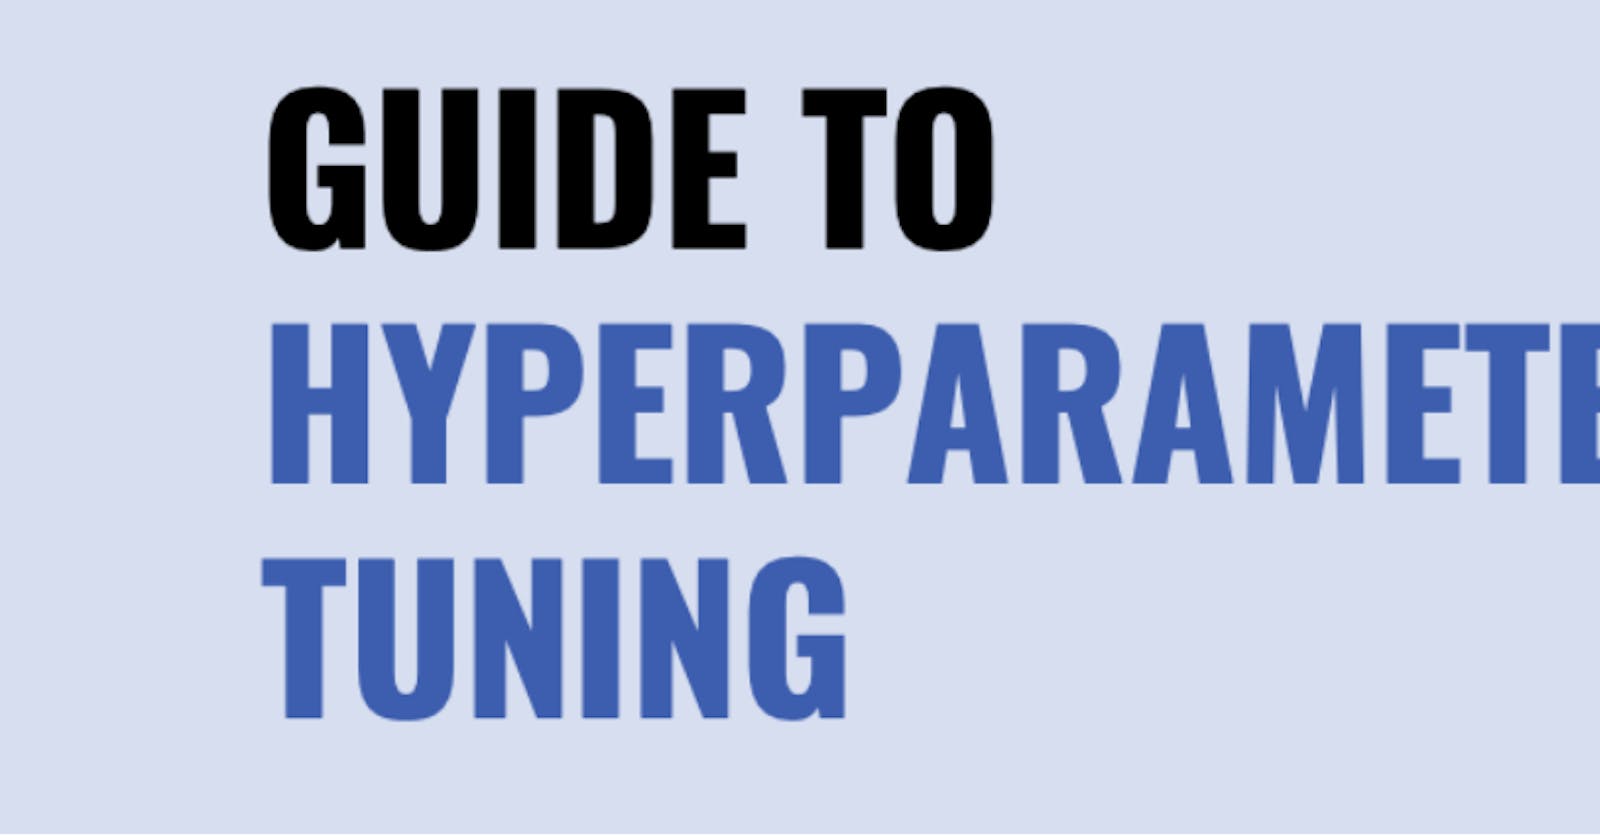 A gentle Guide to HyperParameter Tuning.